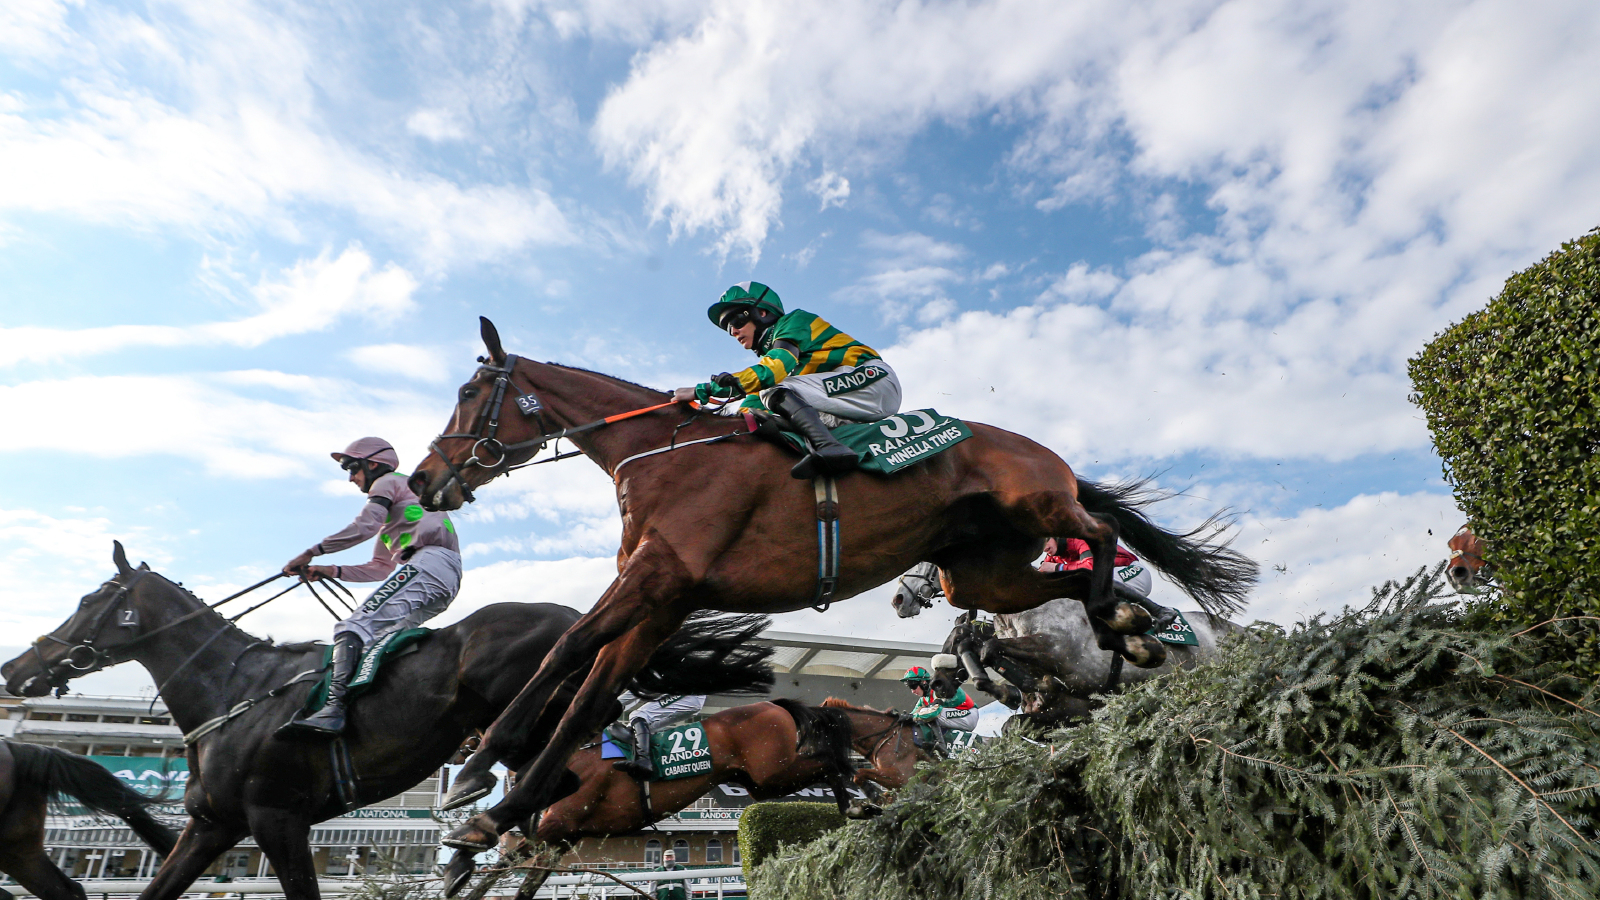 Get your Watches Ready for the Grand National